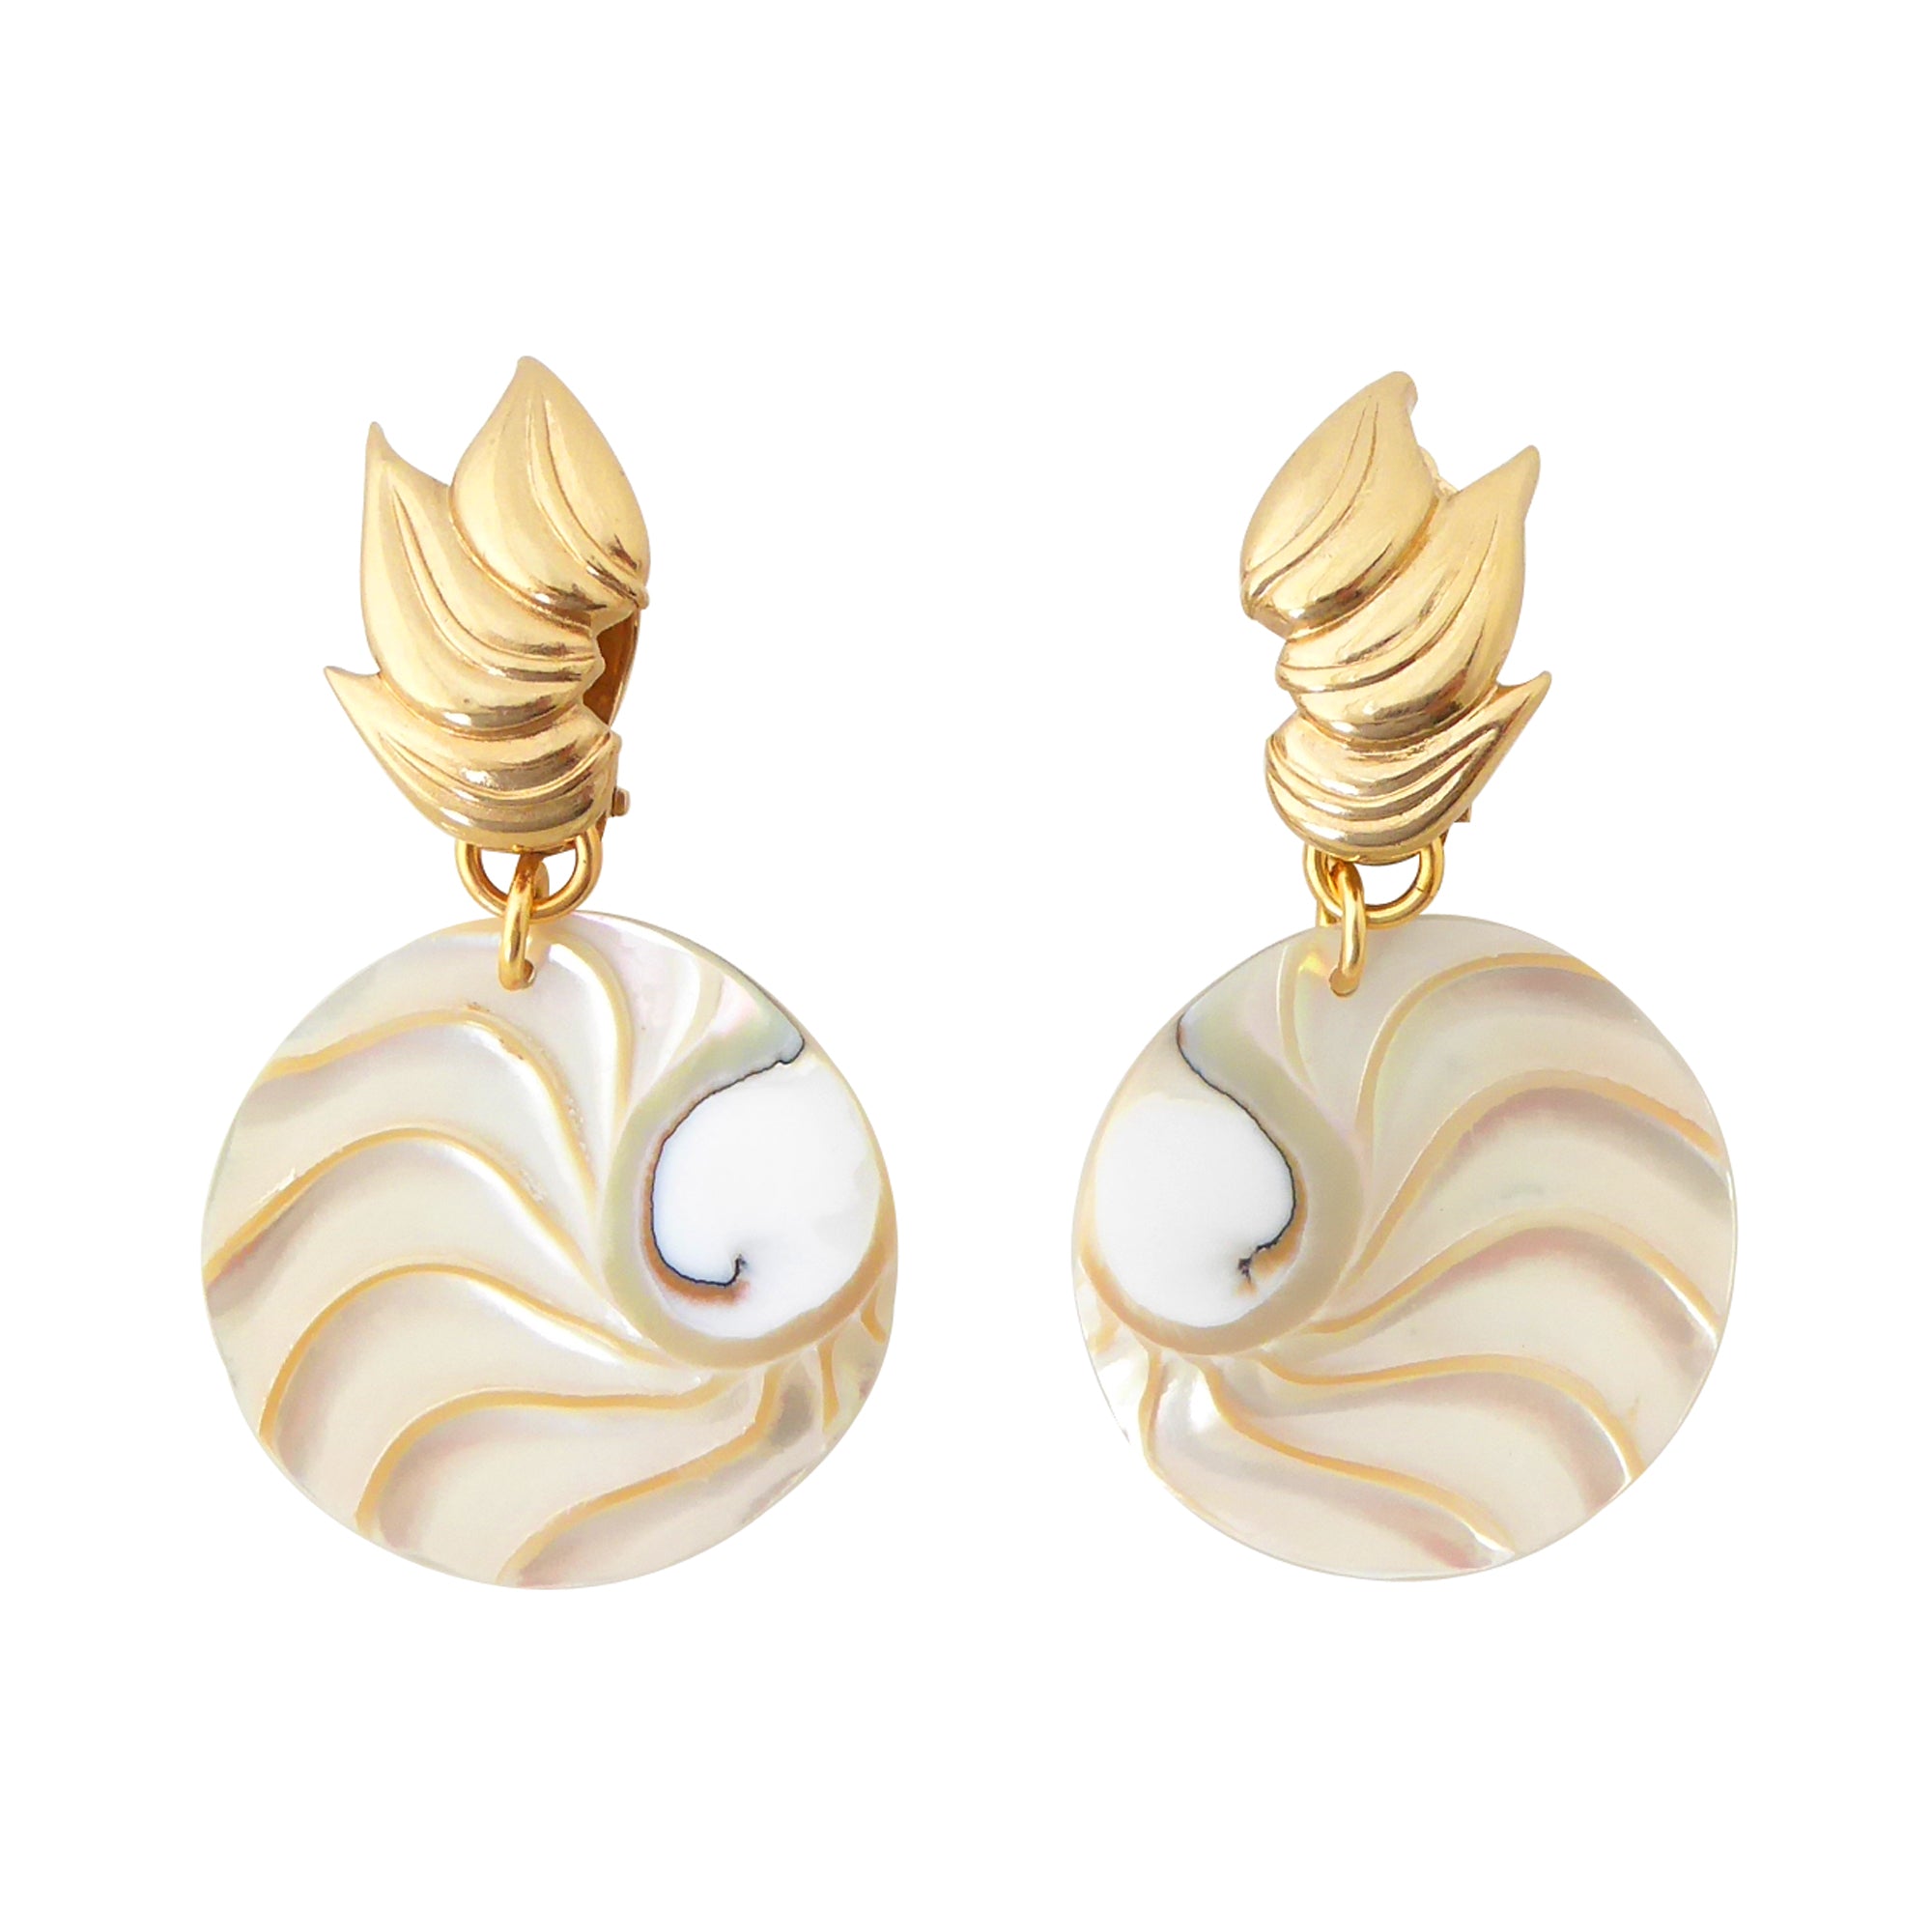 Nautilus chamber earrings by Jenny Dayco 1